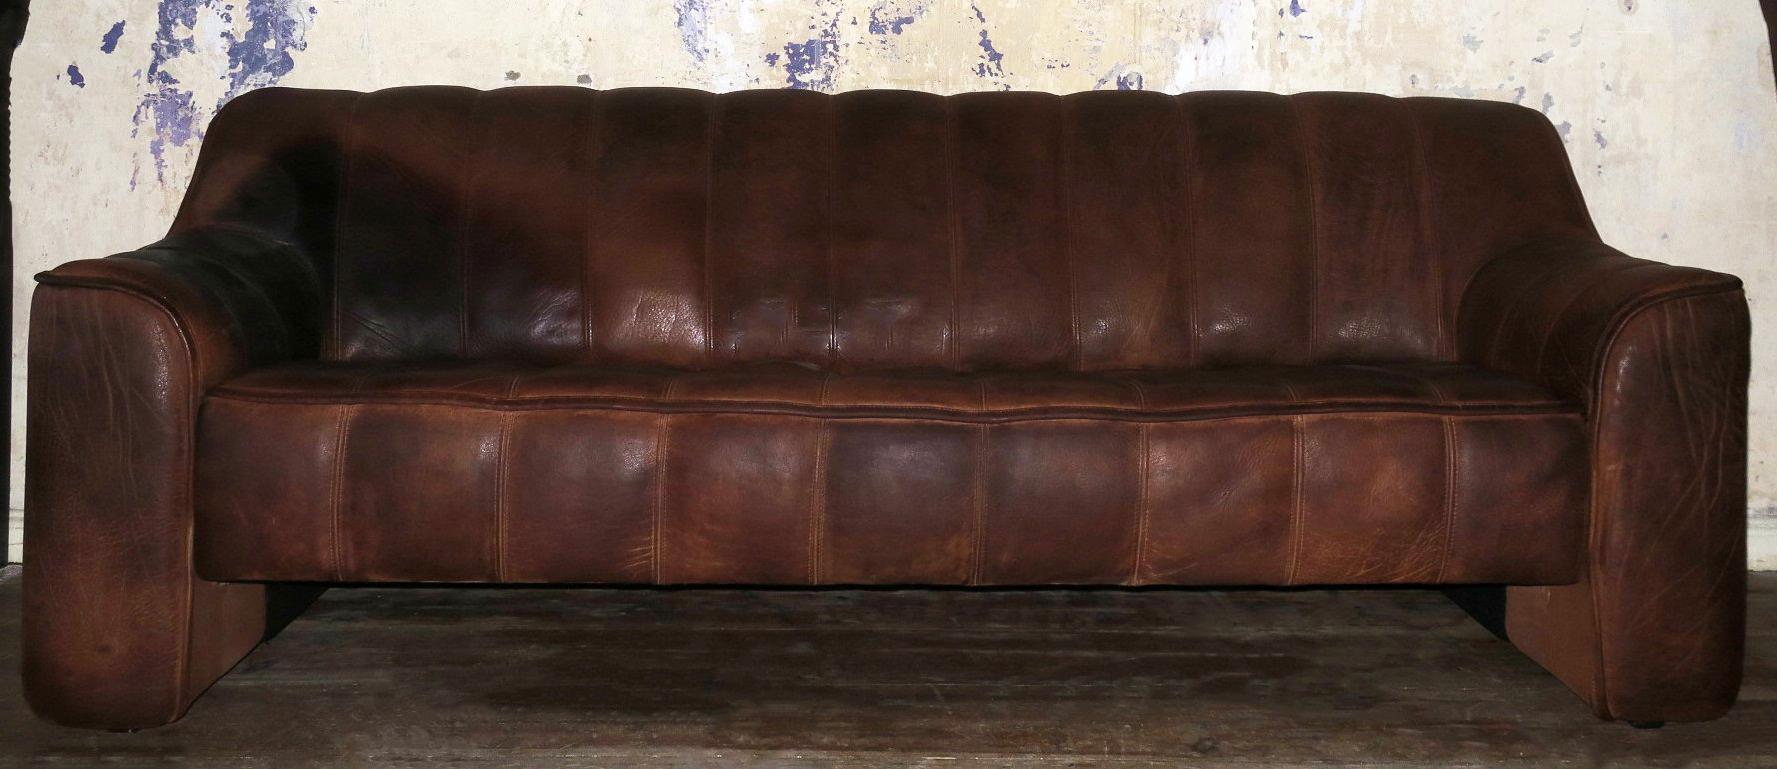 De Sede DS 44 3-seat sofa in buffalo leather, with an extendable seat, very nice patina and in very good condition.
Made in Switzerland.